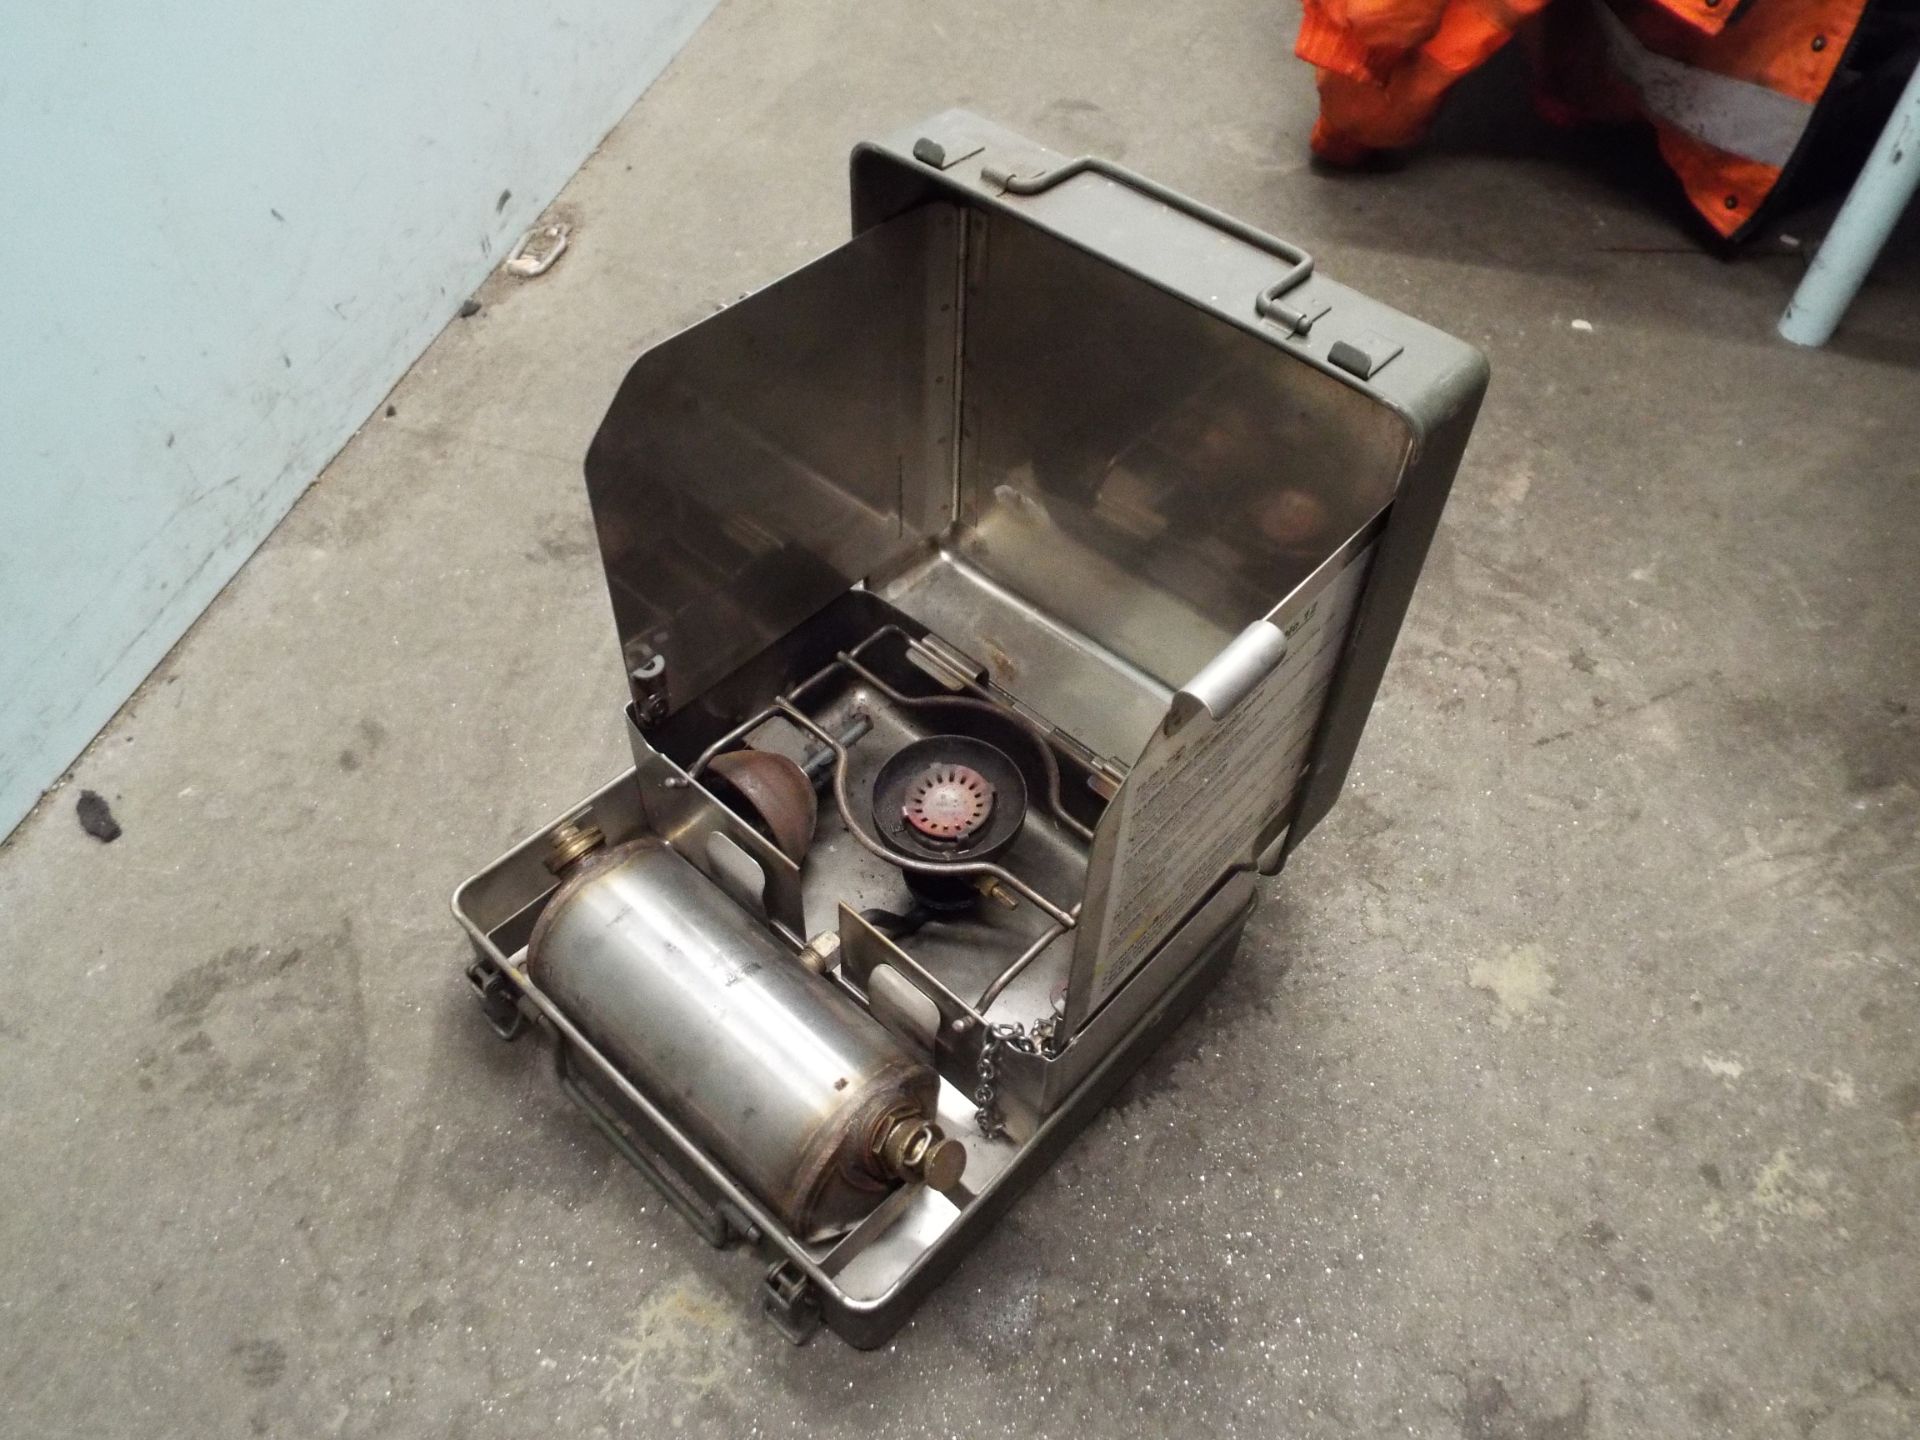 No. 12 Stove, Diesel Cooker/Camping Stove